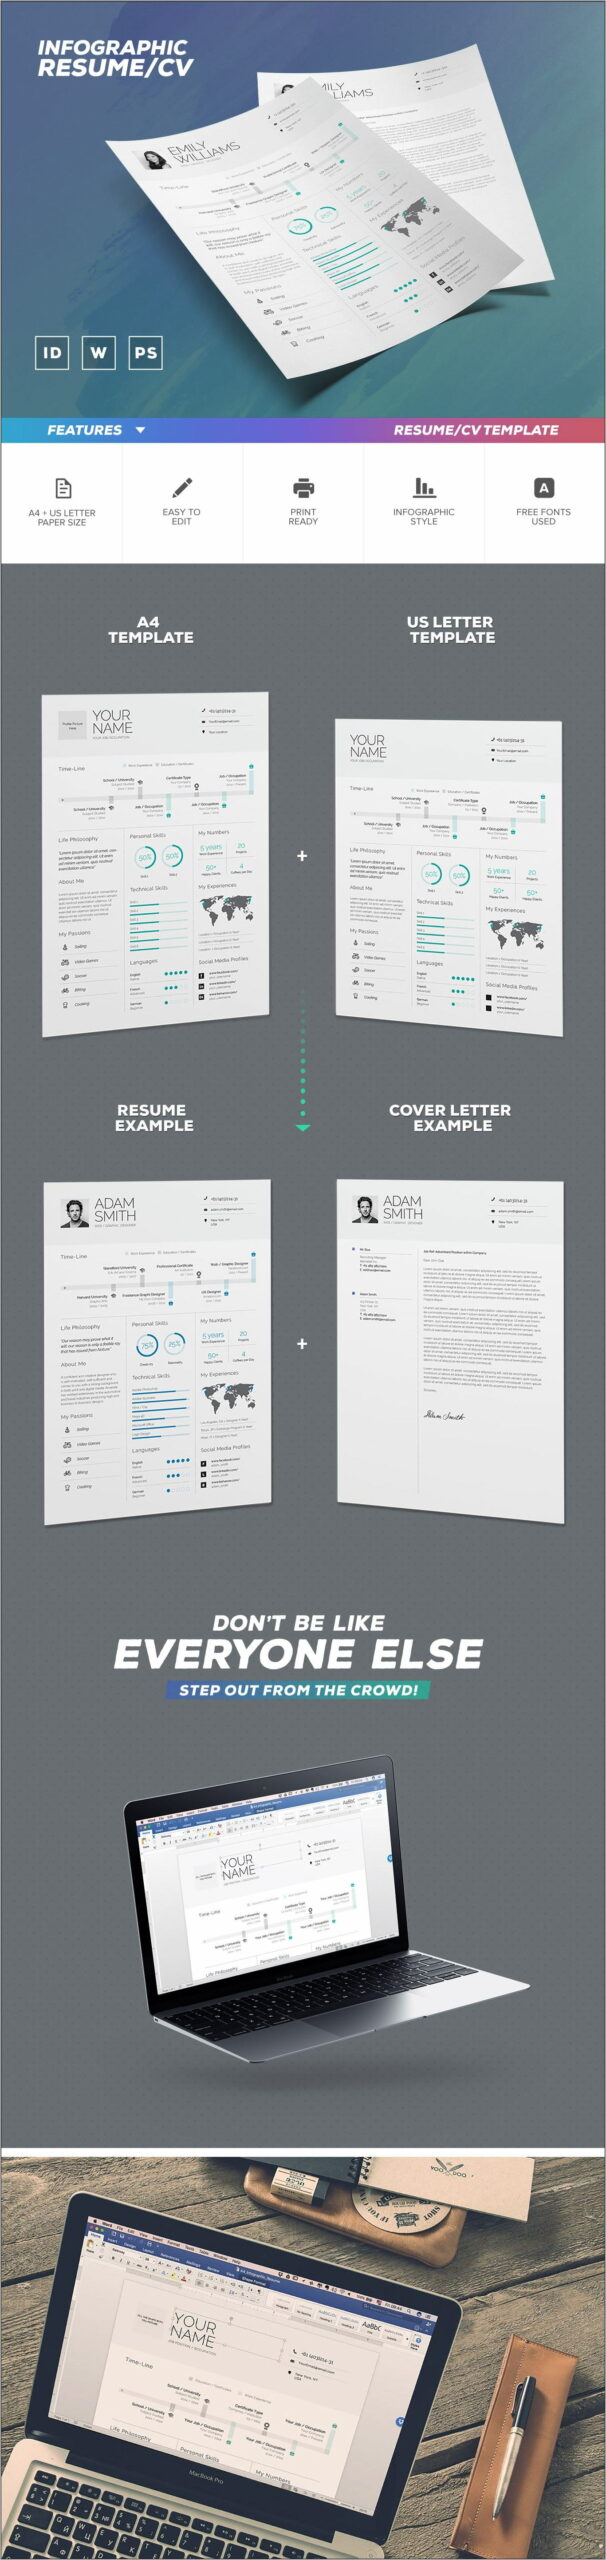 free-infographic-resume-template-for-microsoft-products-resume